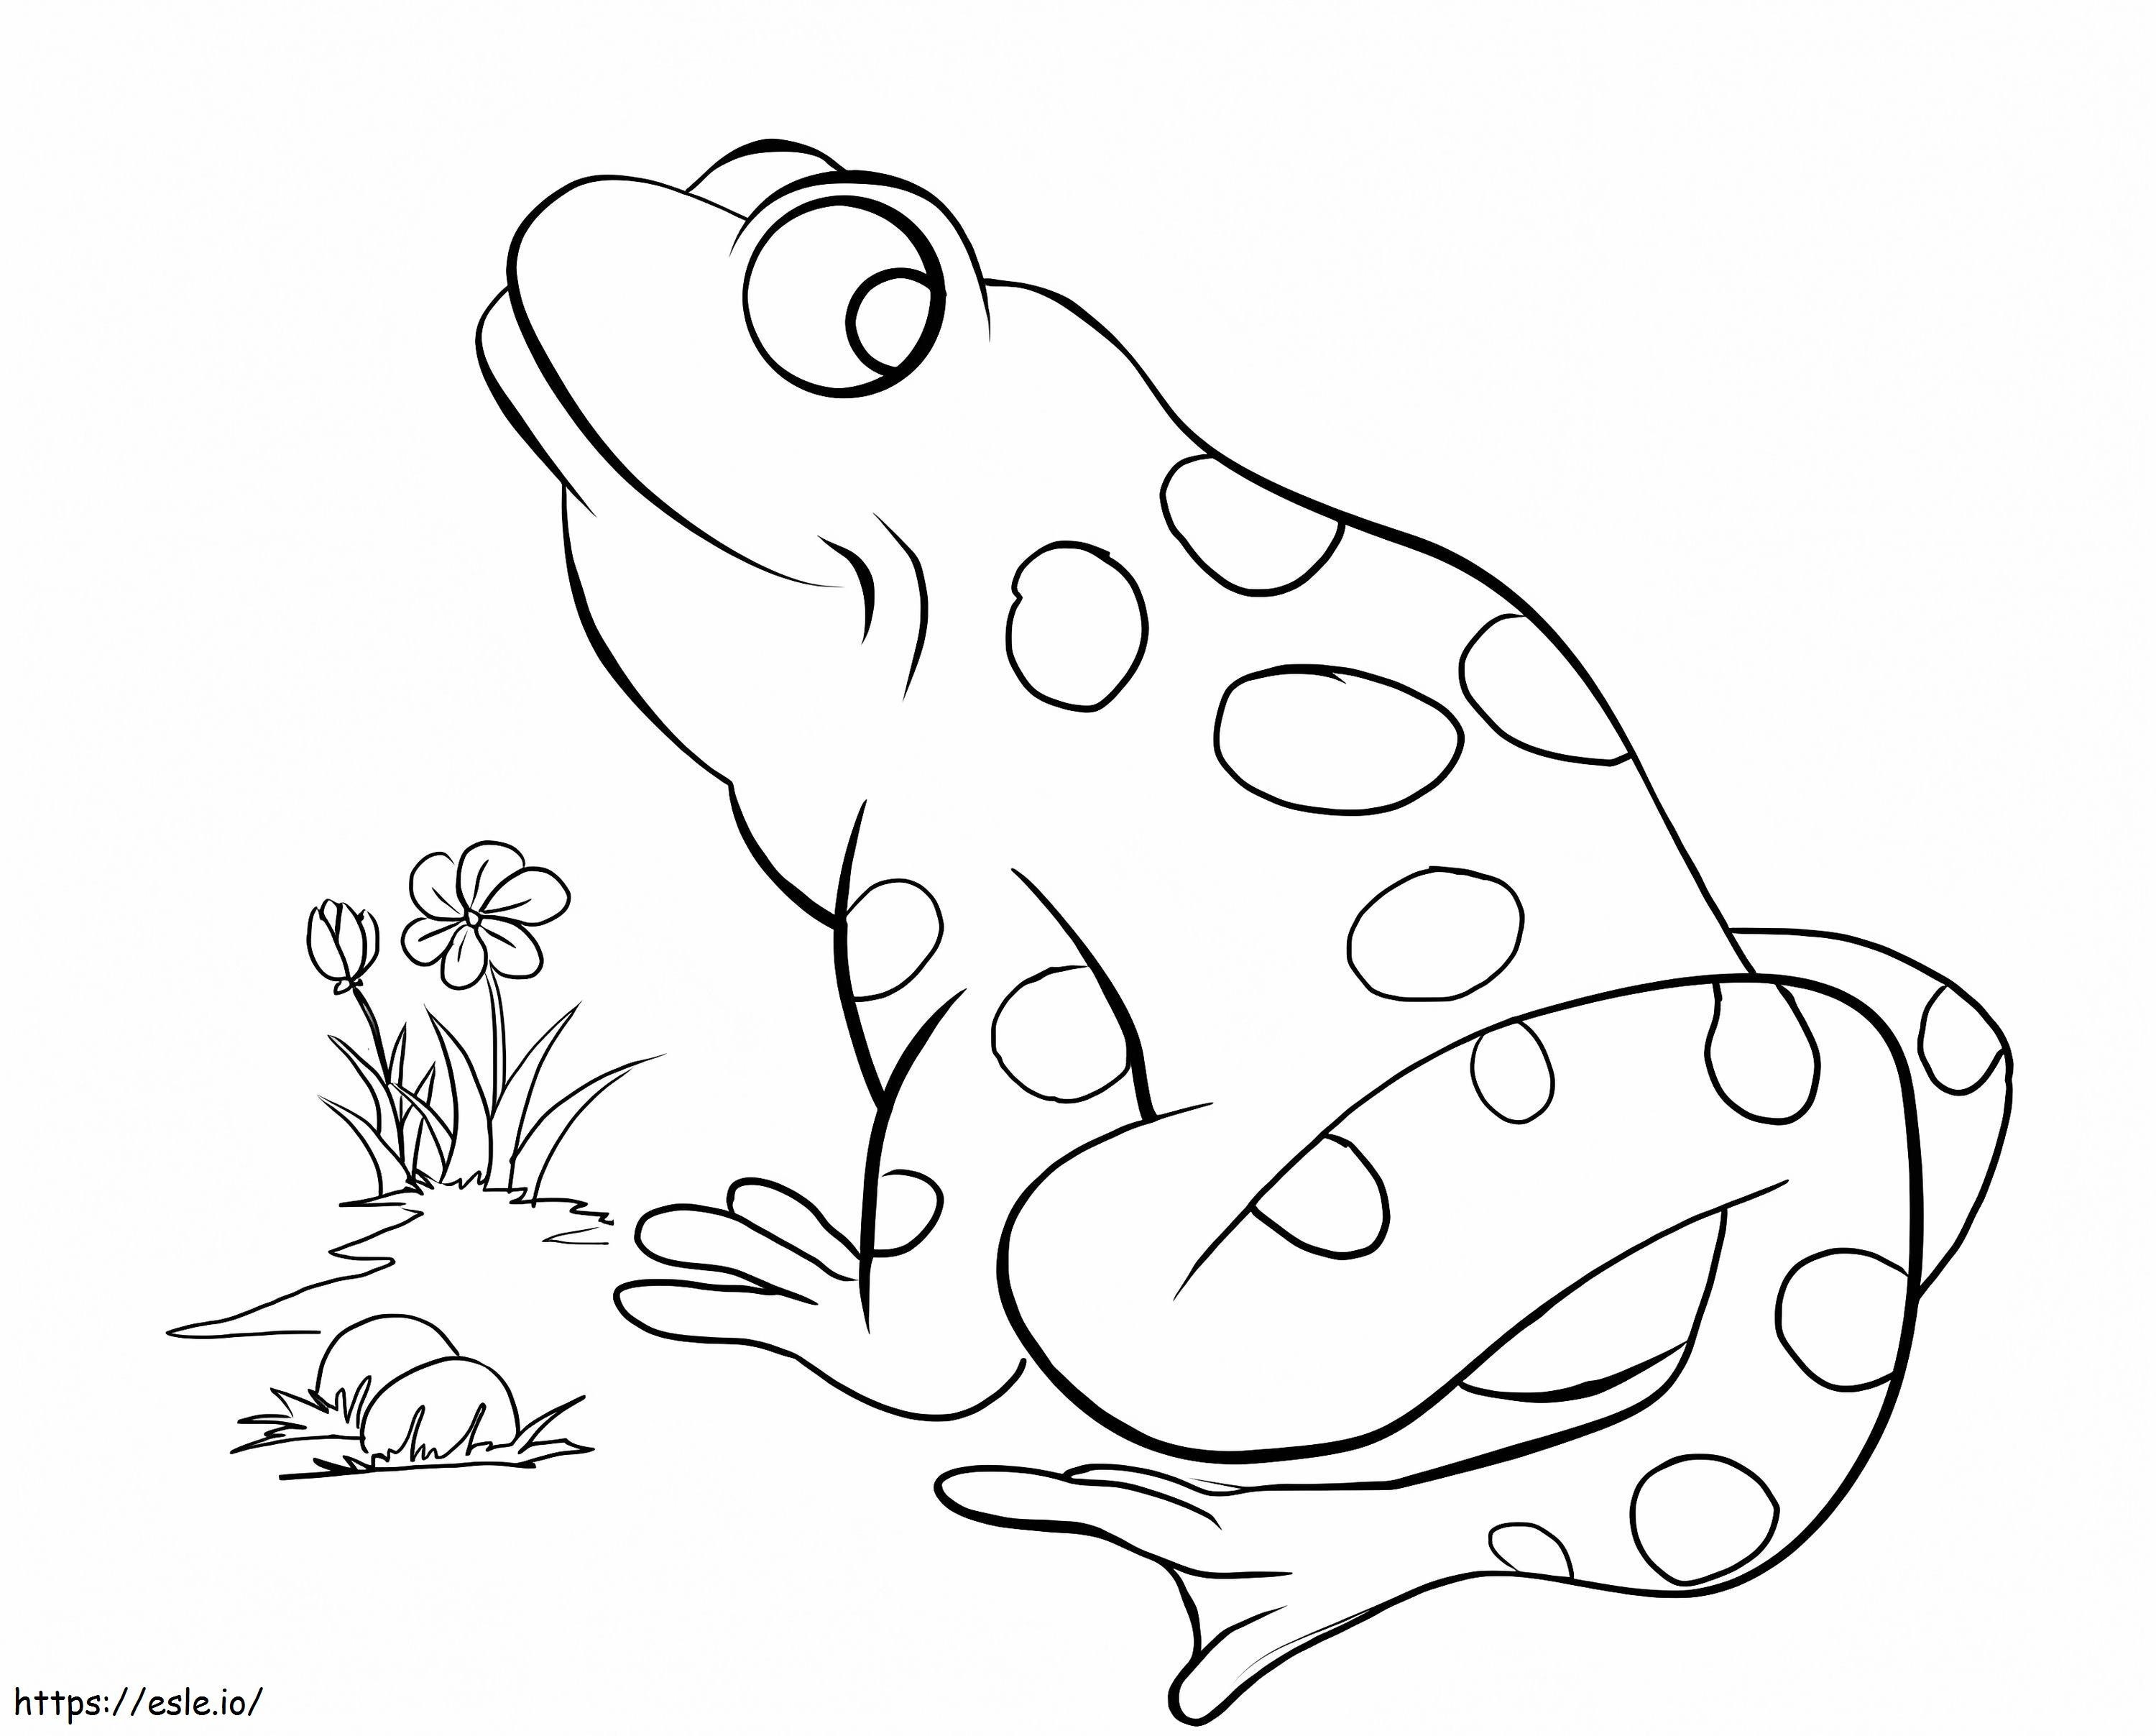 Toad And Flower coloring page